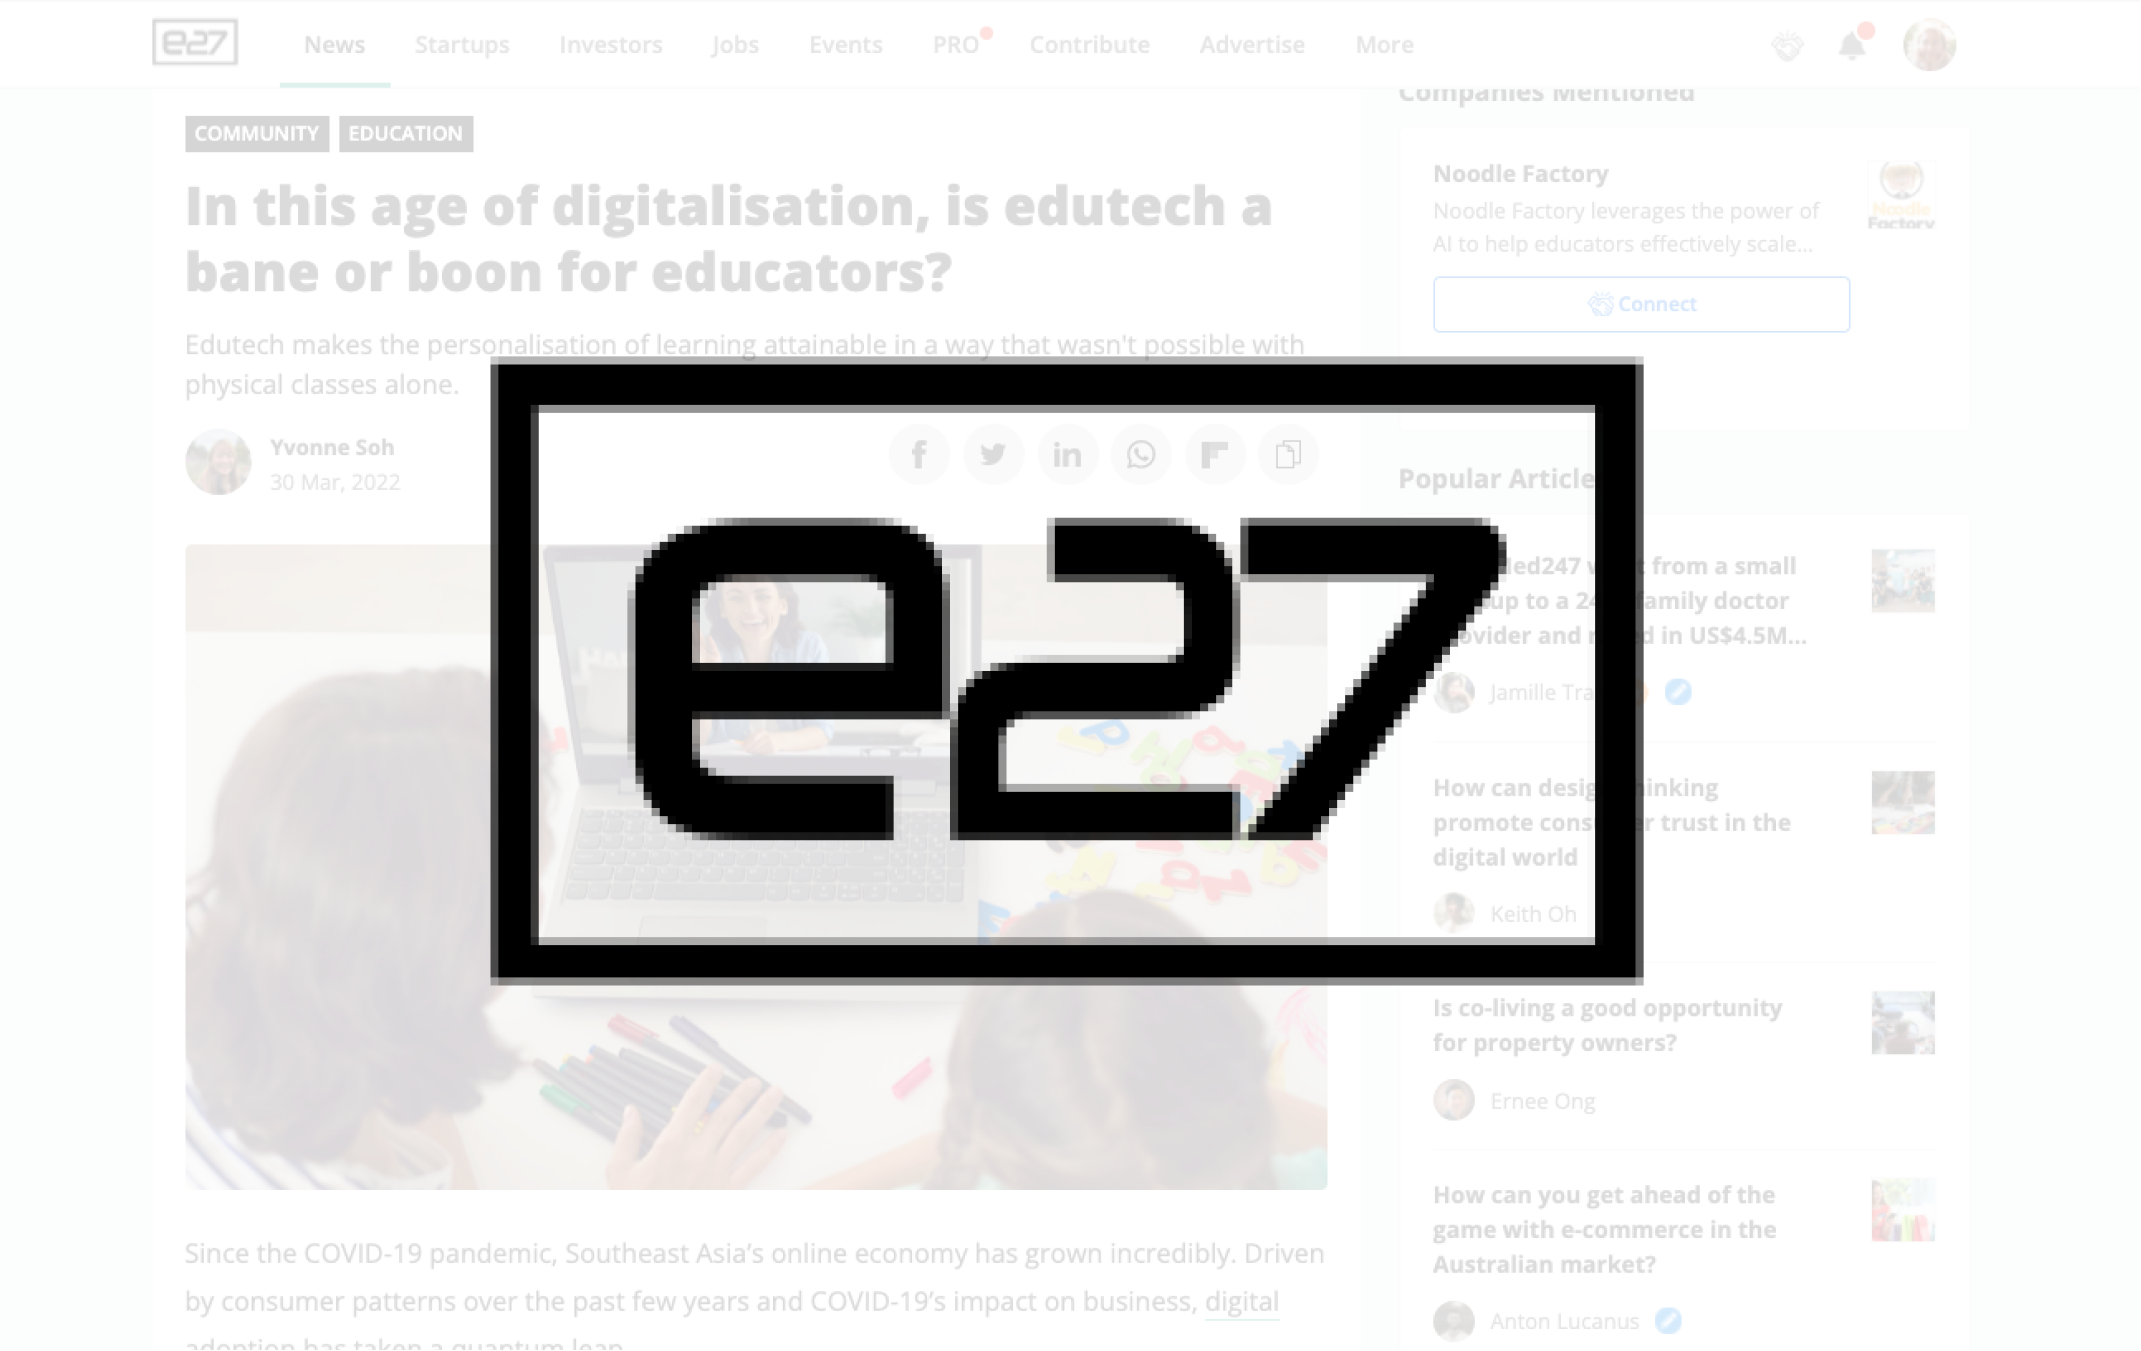 In this age of digitalisation, is edutech a bane or boon for educators?